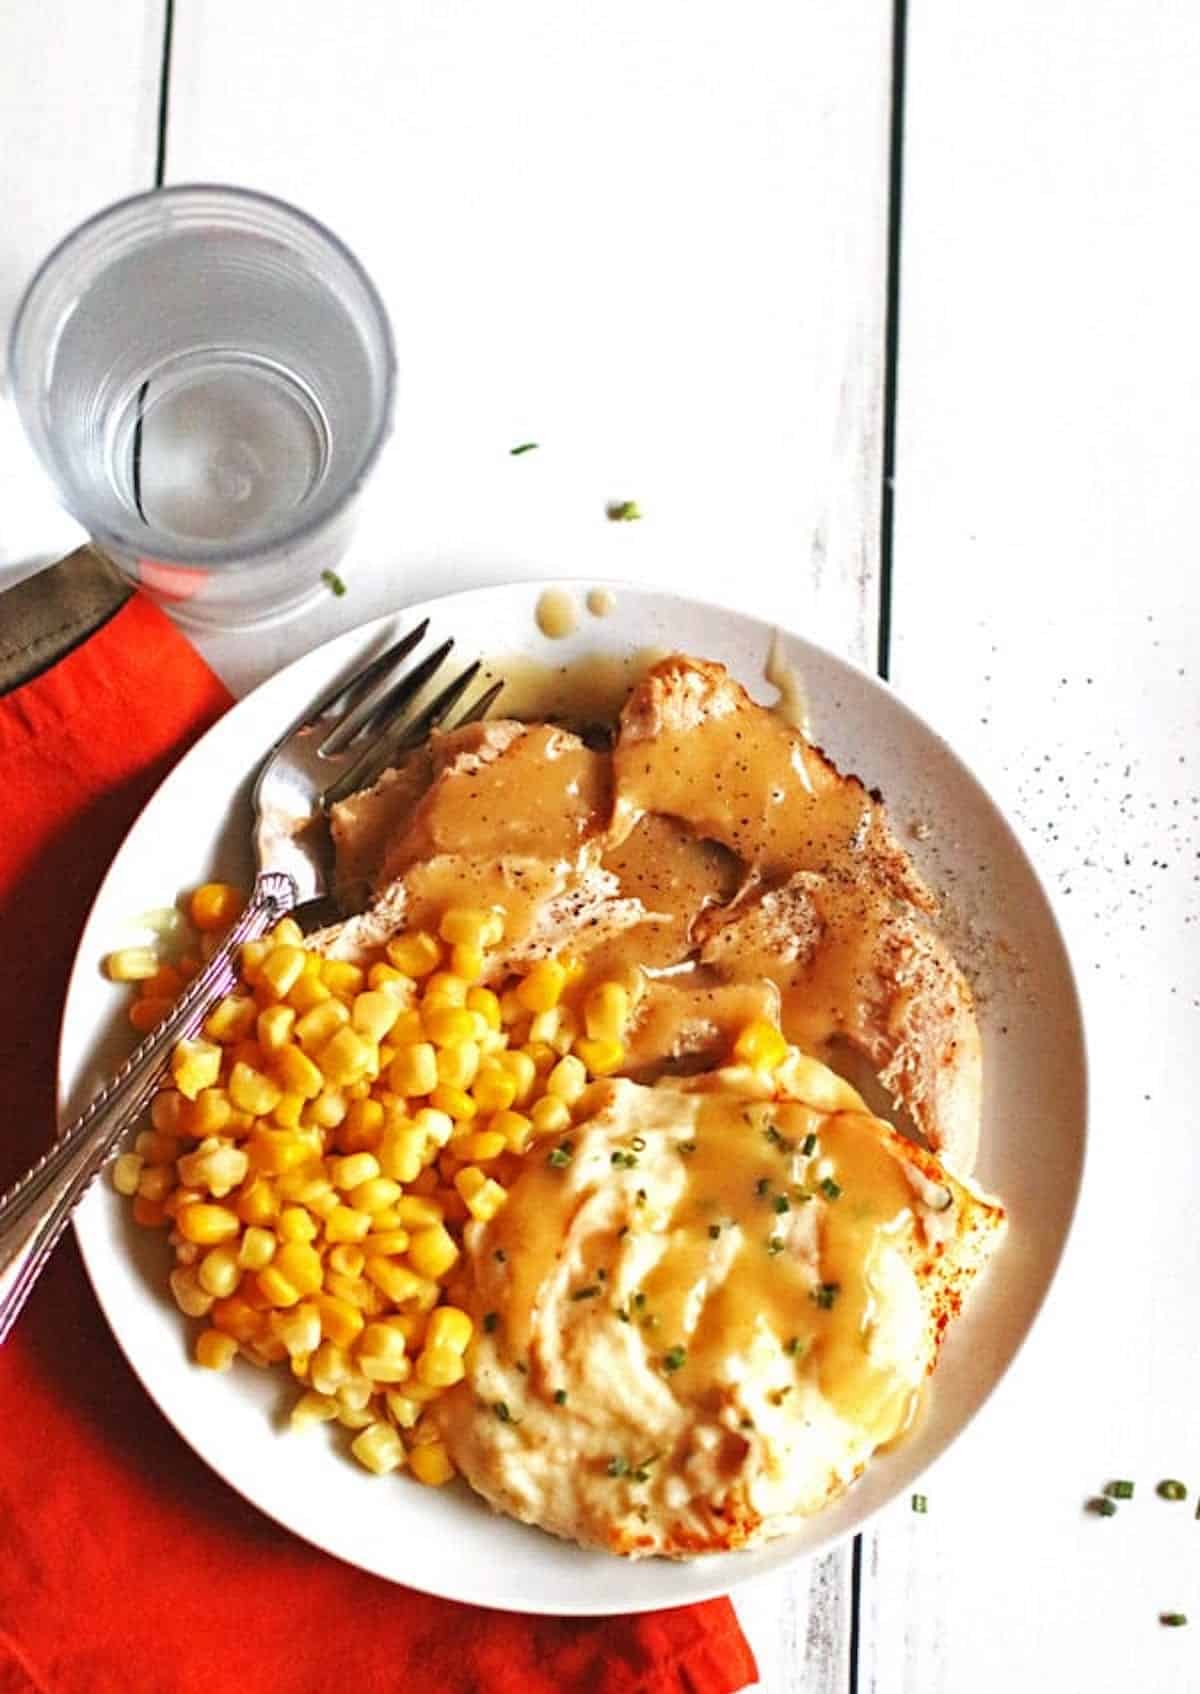 A plate of juicy slow cooker turkey breast smothered in gravy with mashed potatoes and corn.